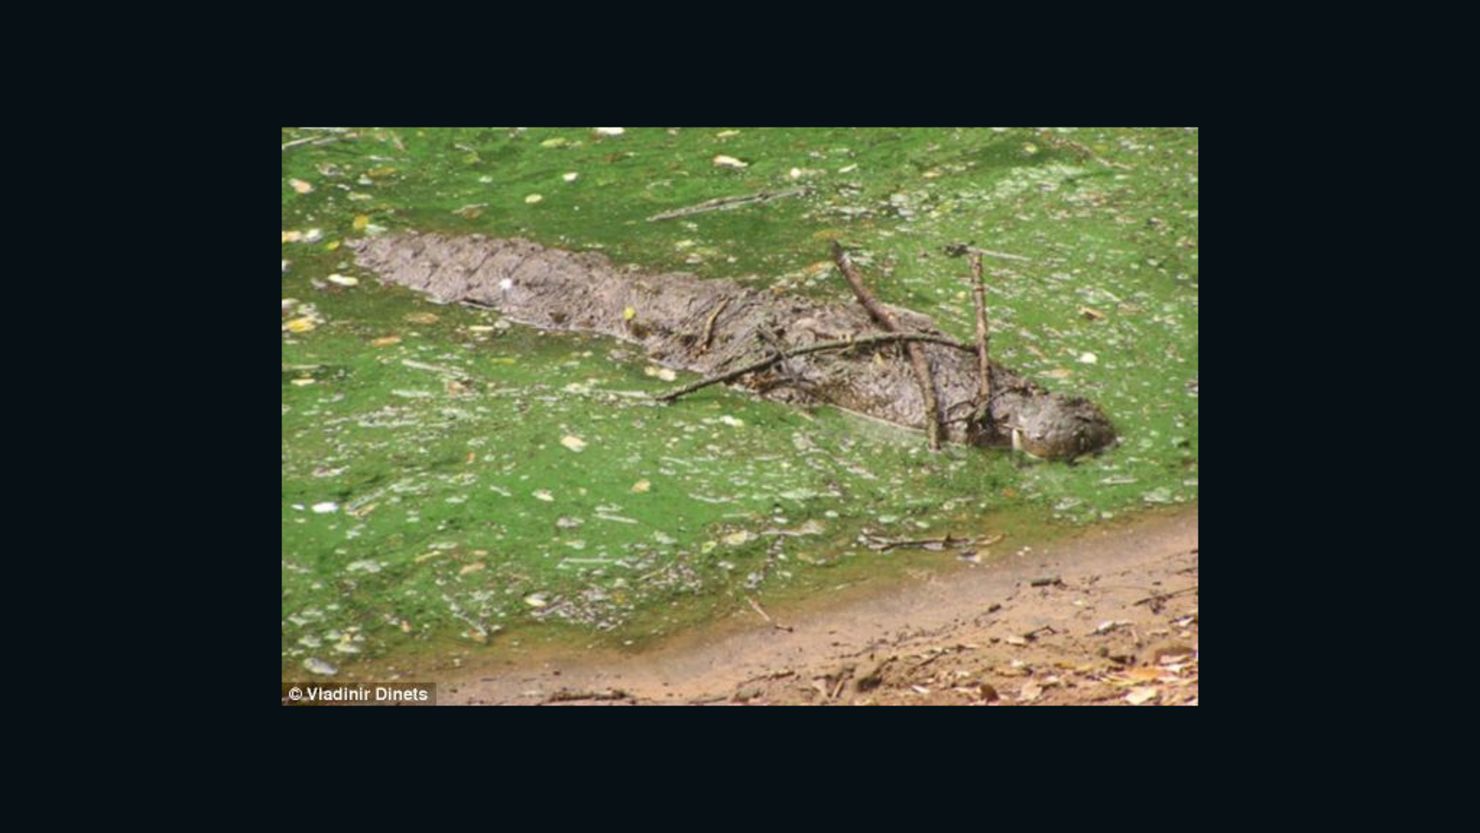 Crocs hunt with sticks, researchers say